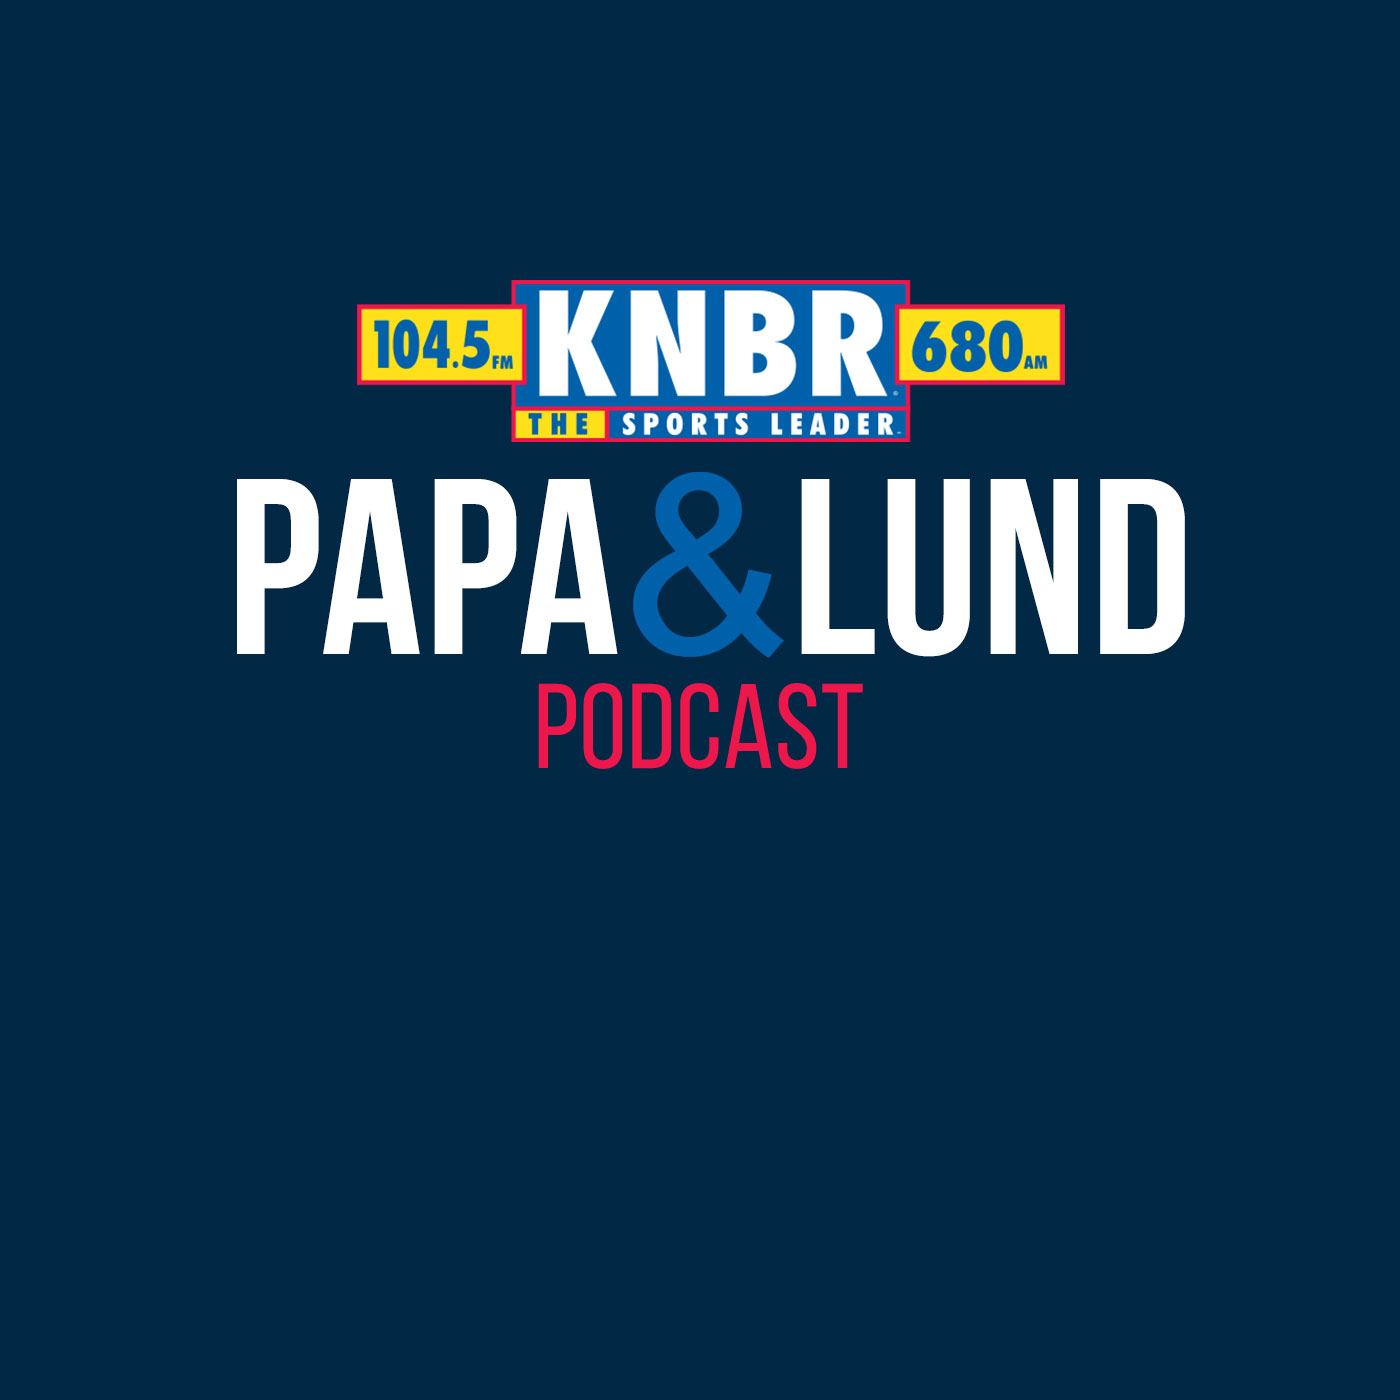 4-16 John Dickinson of Dubs OT joins Papa & Lund to give us the final break down between the Warriors & Kings and which players the Warriors will need to lean on in order to advance to the Playoffs